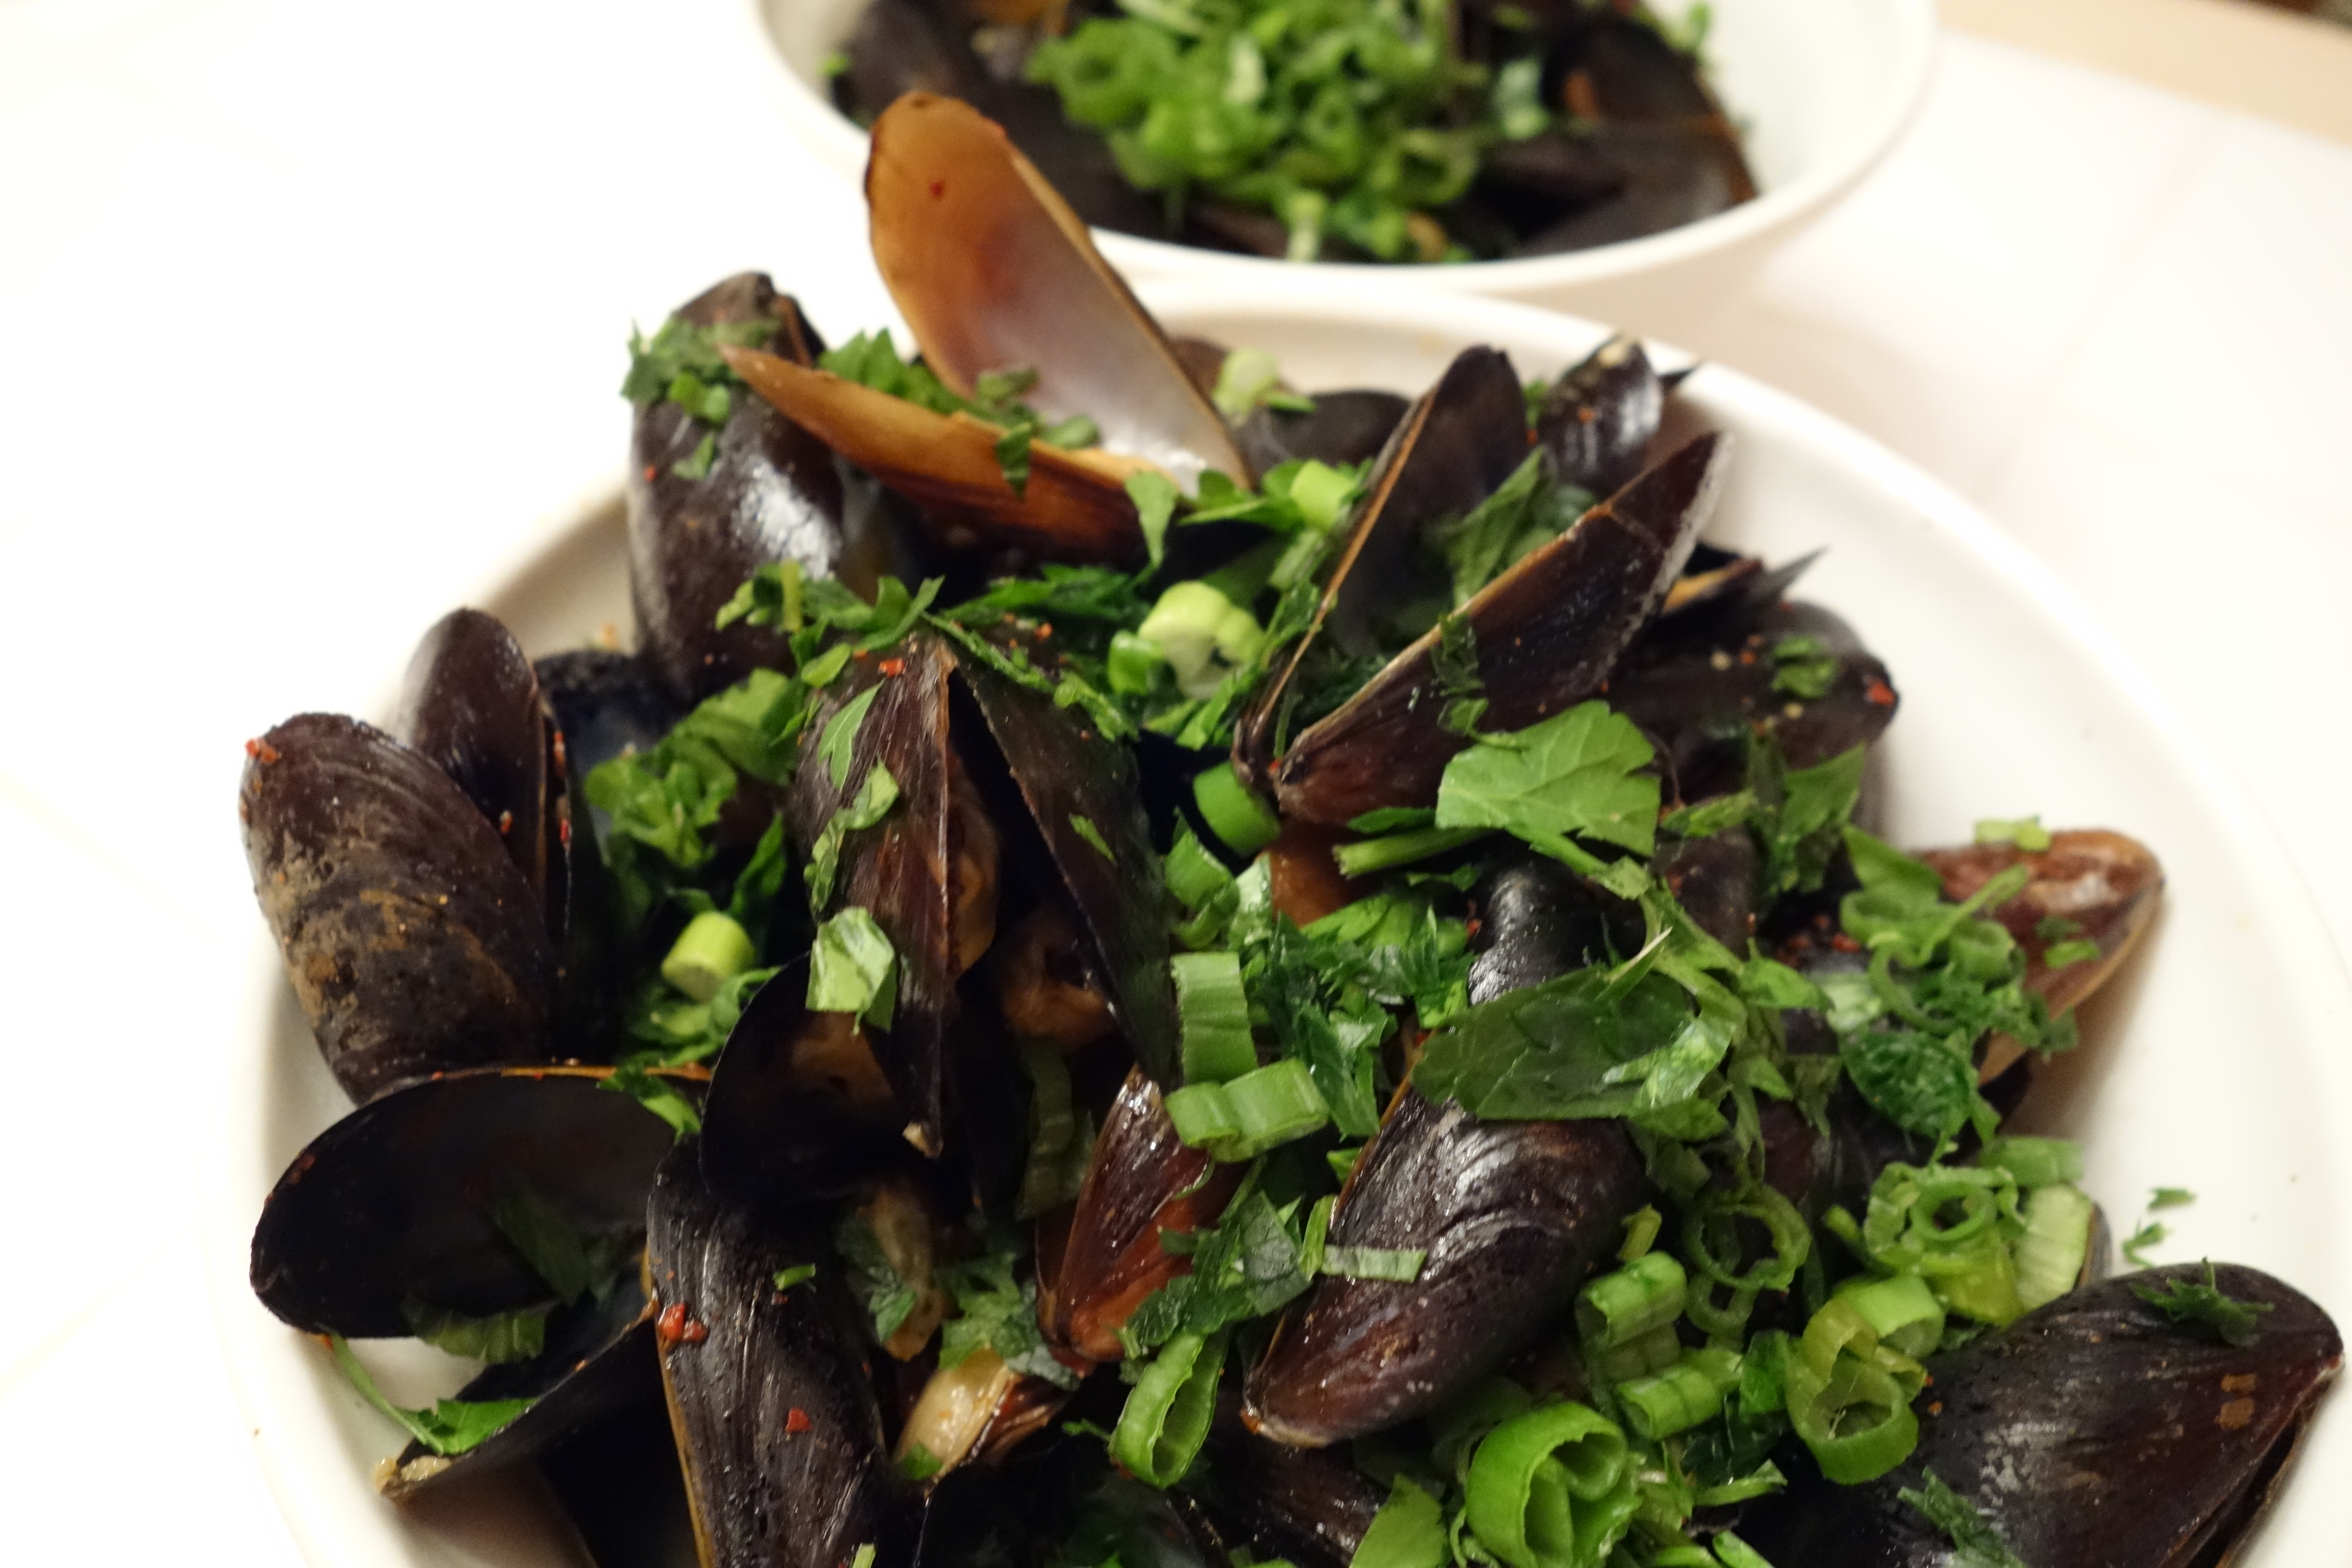 korean-style mussels in spicy broth. :: by radish*rose